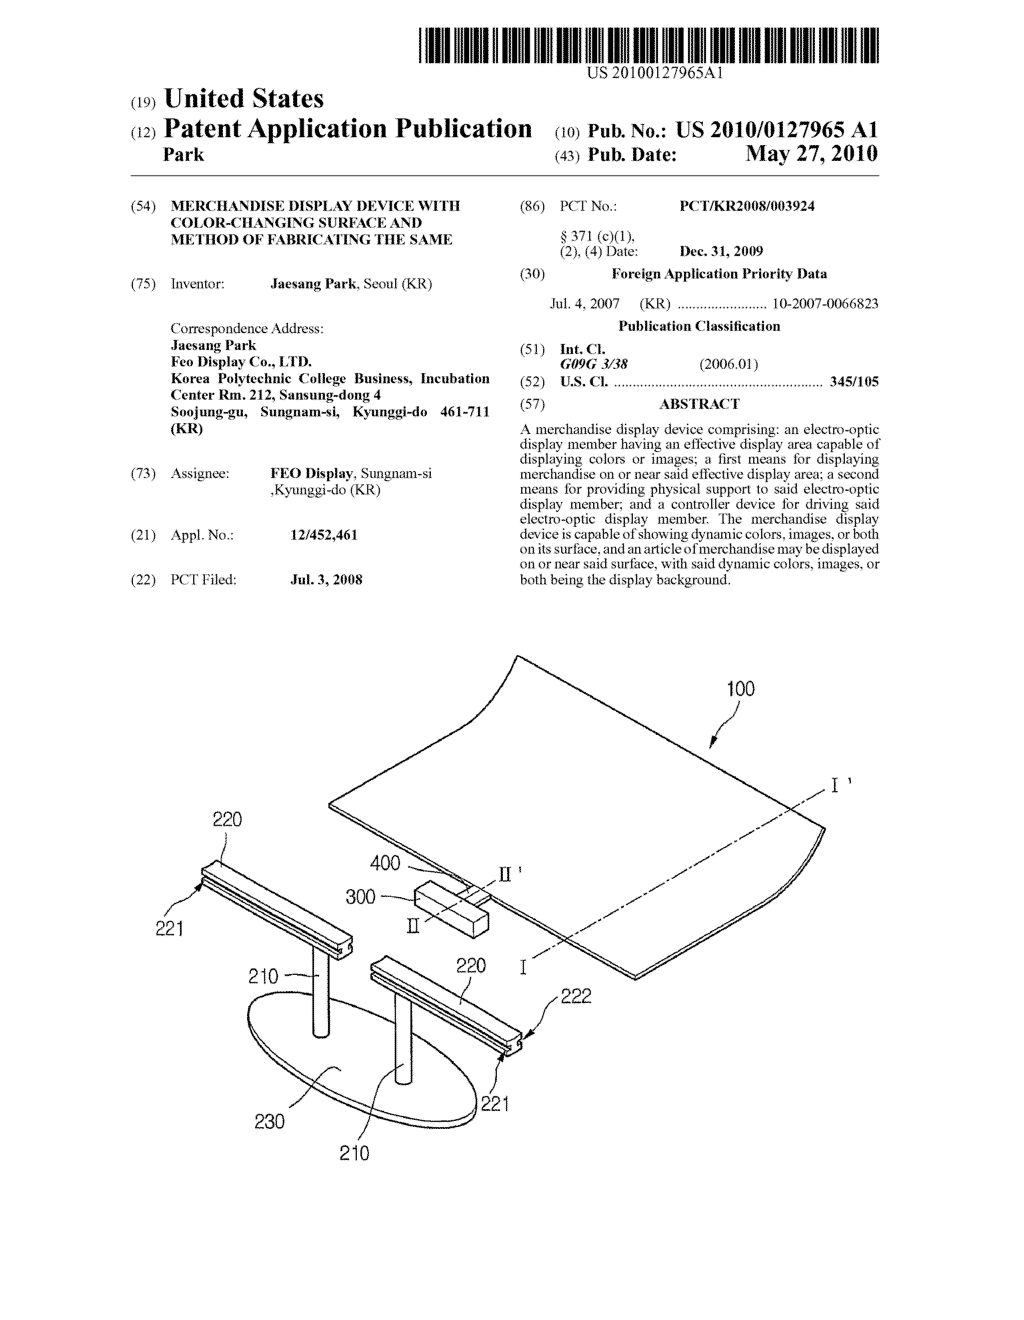 MERCHANDISE DISPLAY DEVICE WITH COLOR-CHANGING SURFACE AND METHOD OF FABRICATING THE SAME - diagram, schematic, and image 01